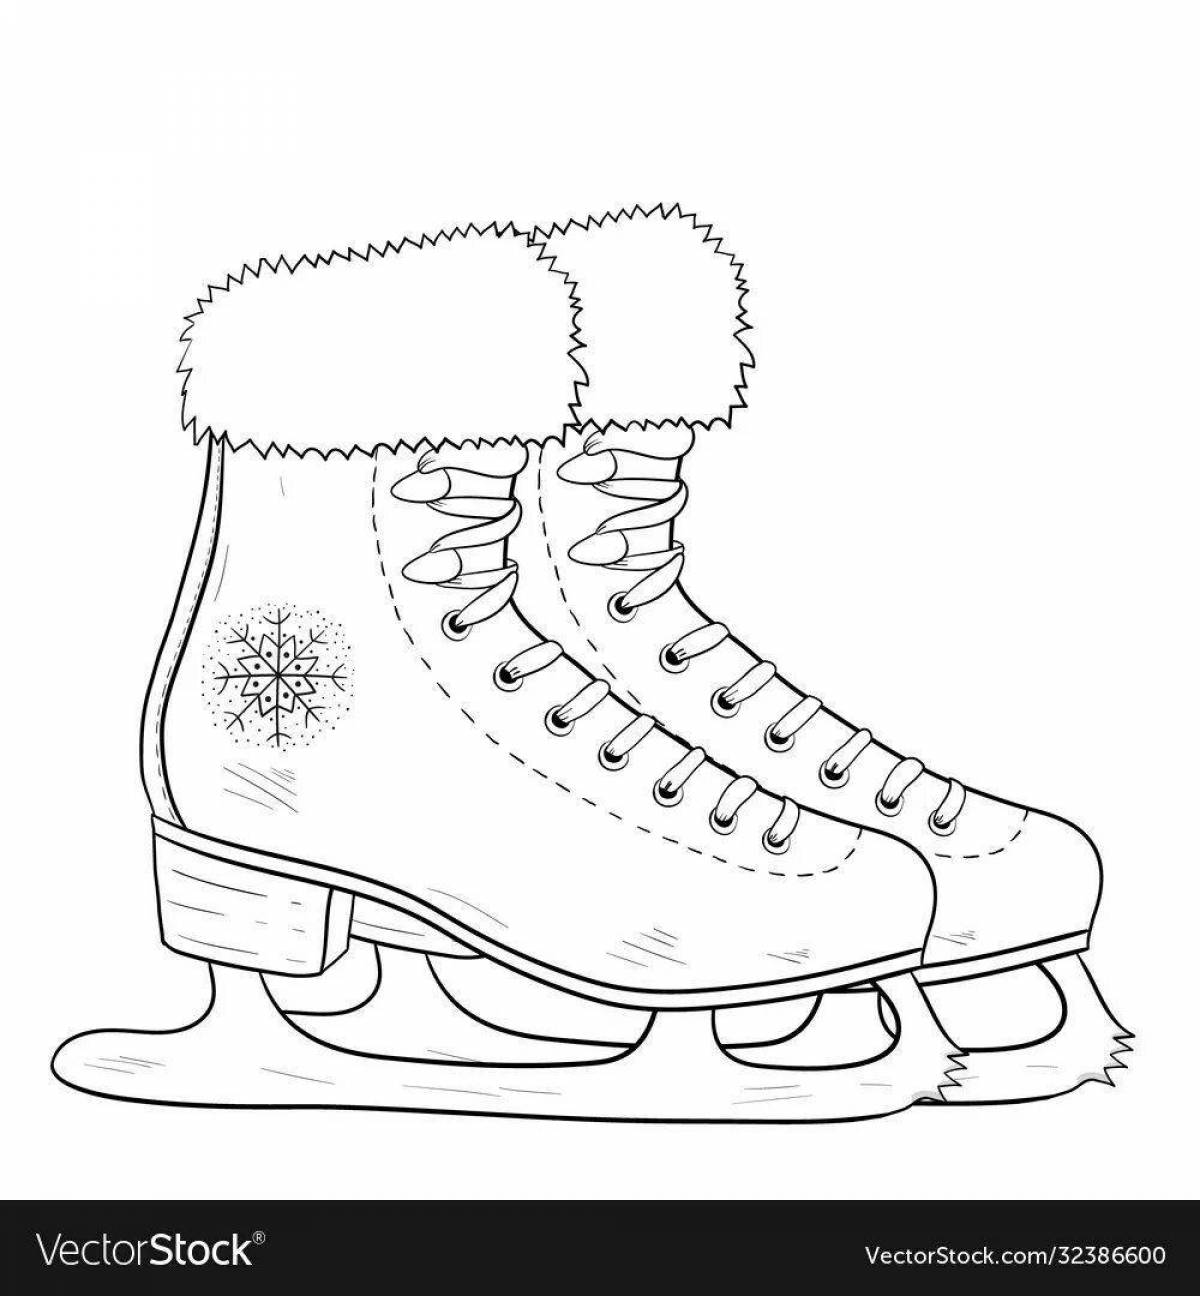 Exciting skate coloring page